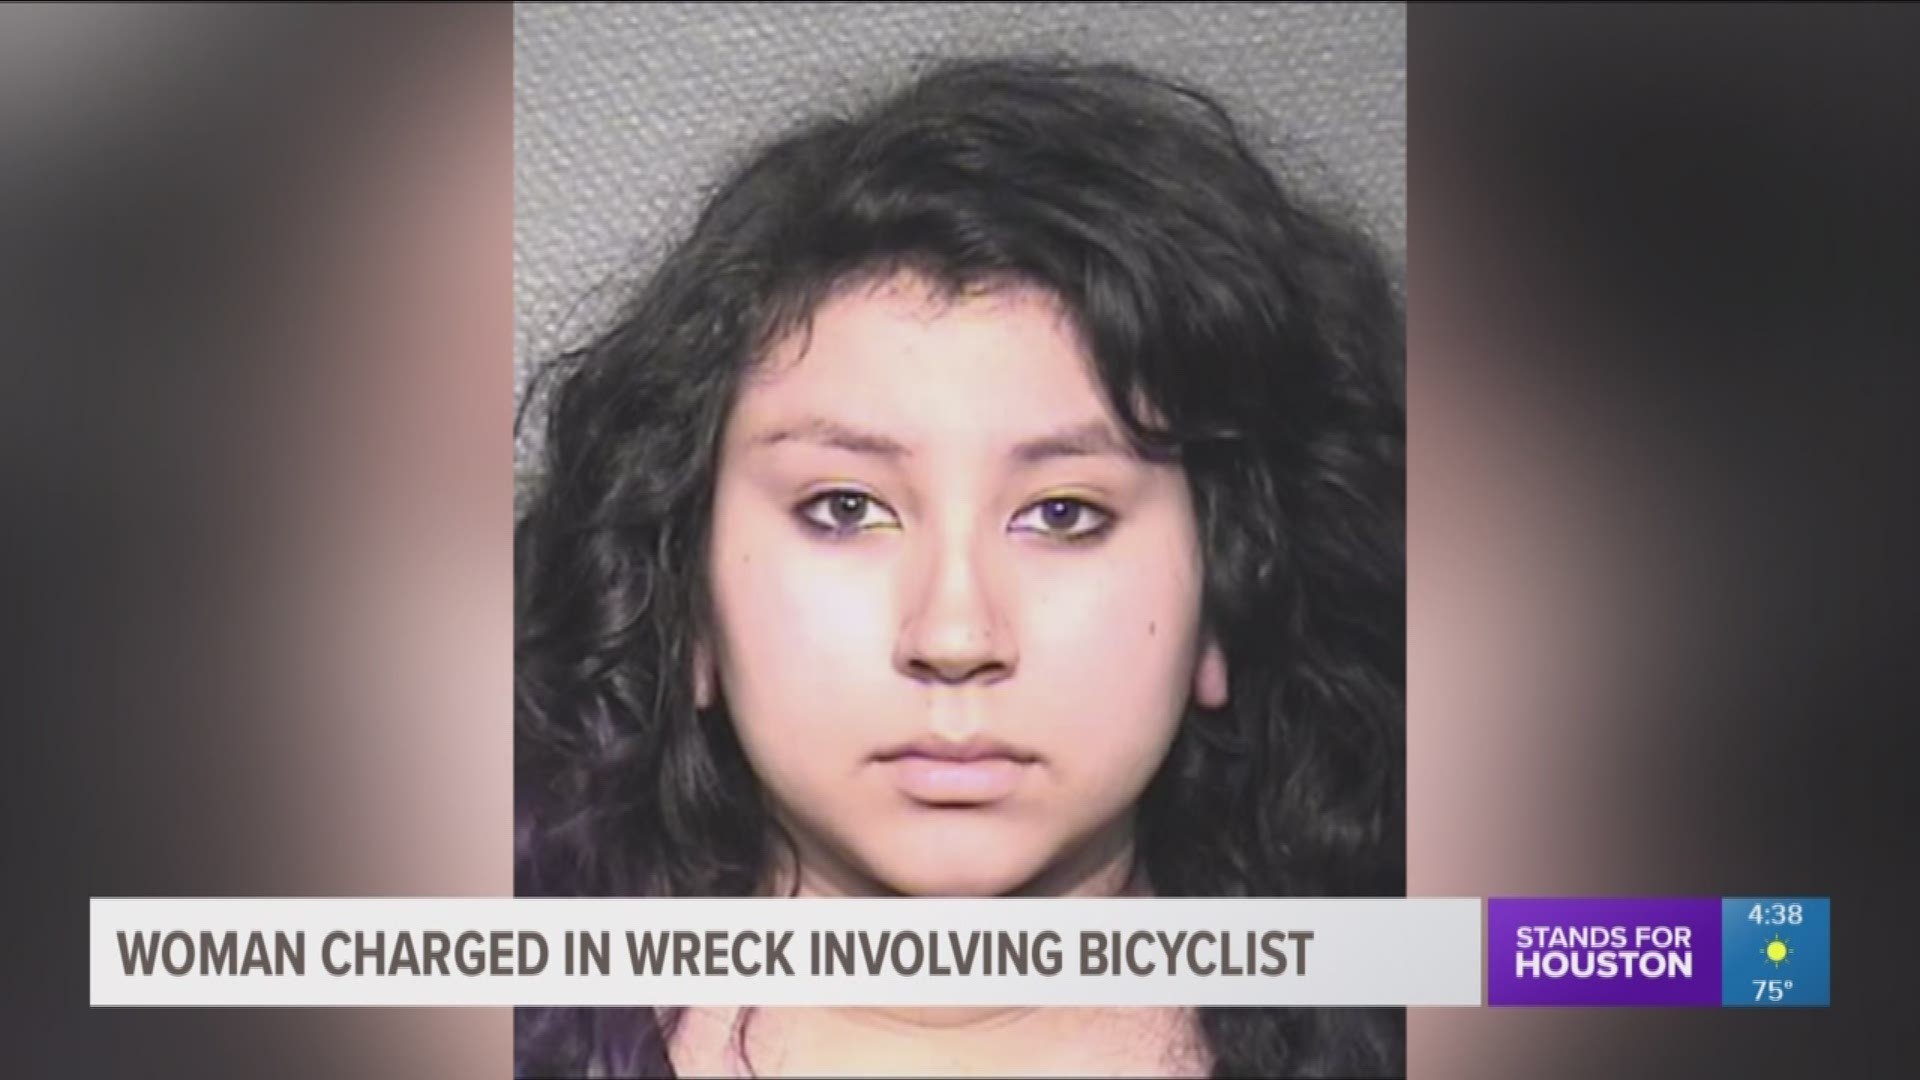 According to police, Jacquline Cruz, 22, critically inured a bicyclist when she hit him with her car while she was driving under the influence. 